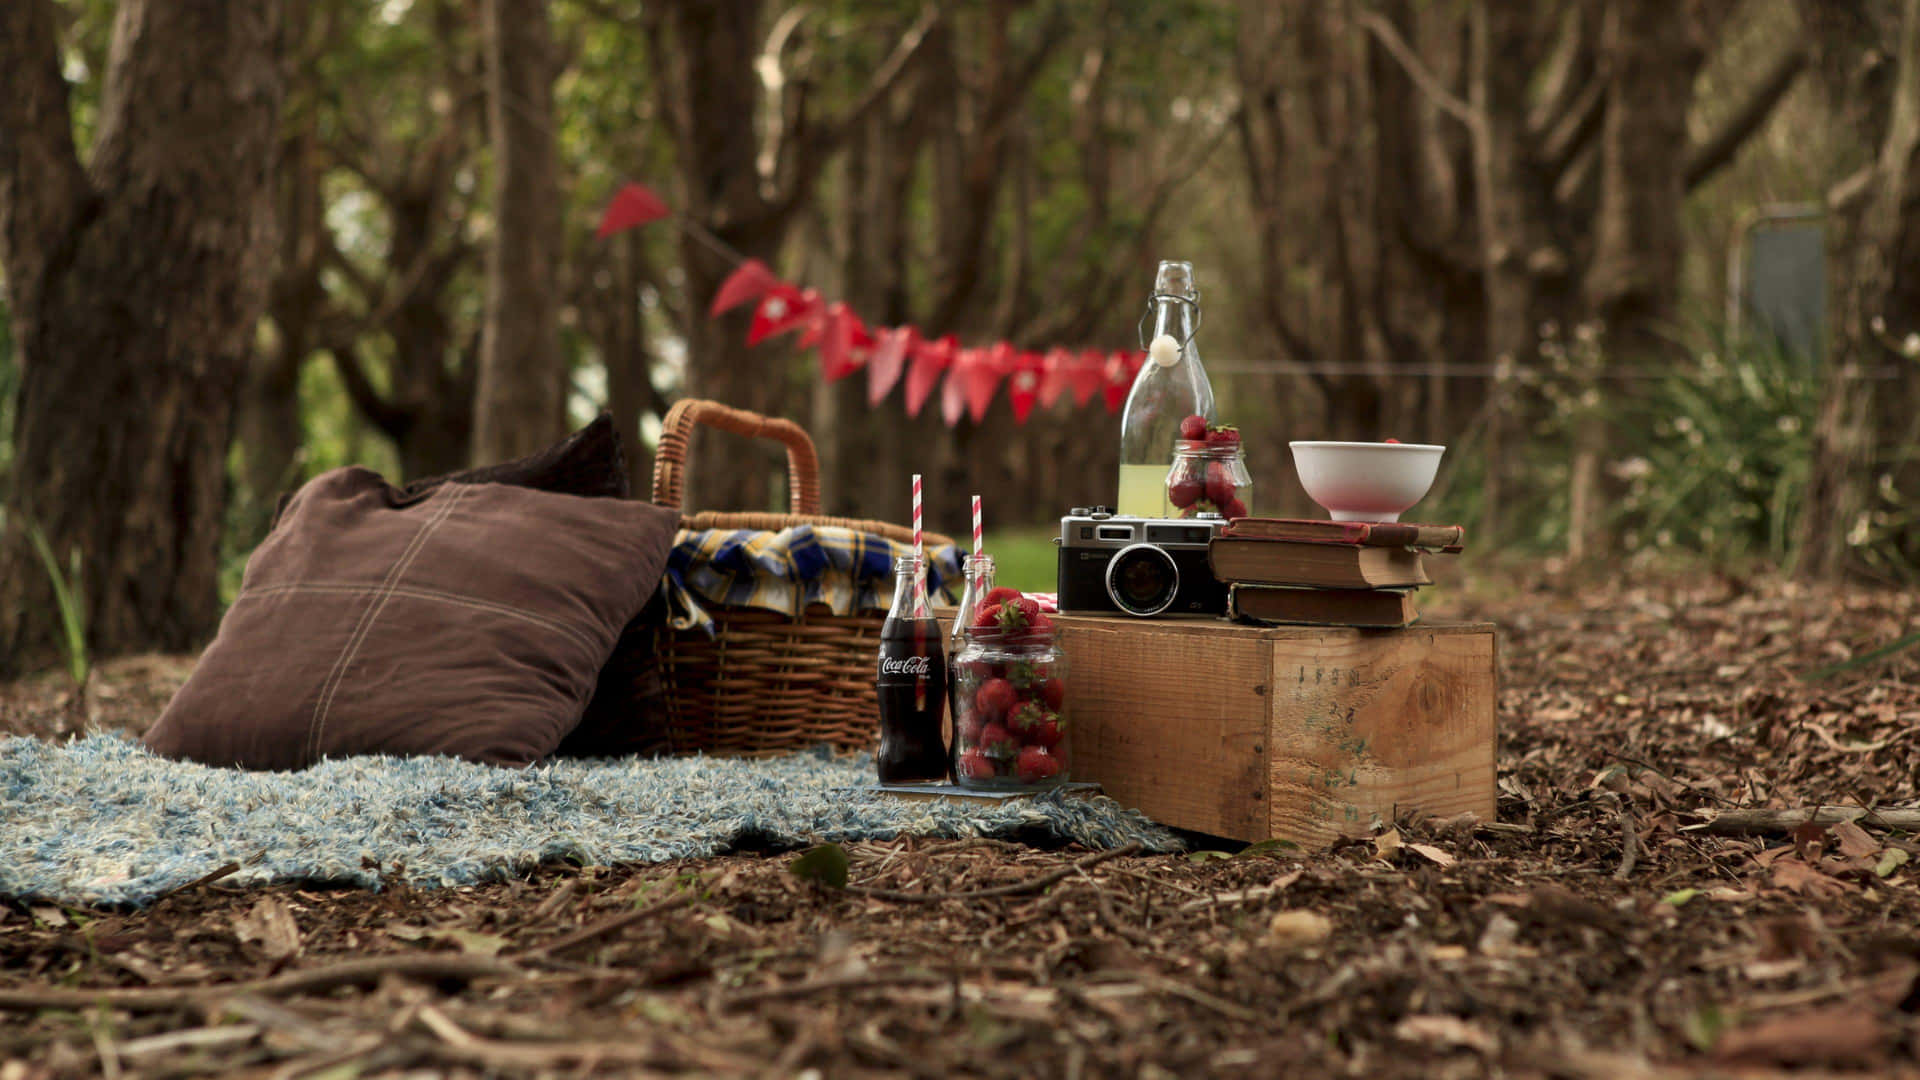 Picnic Set Up In The Forest Picture